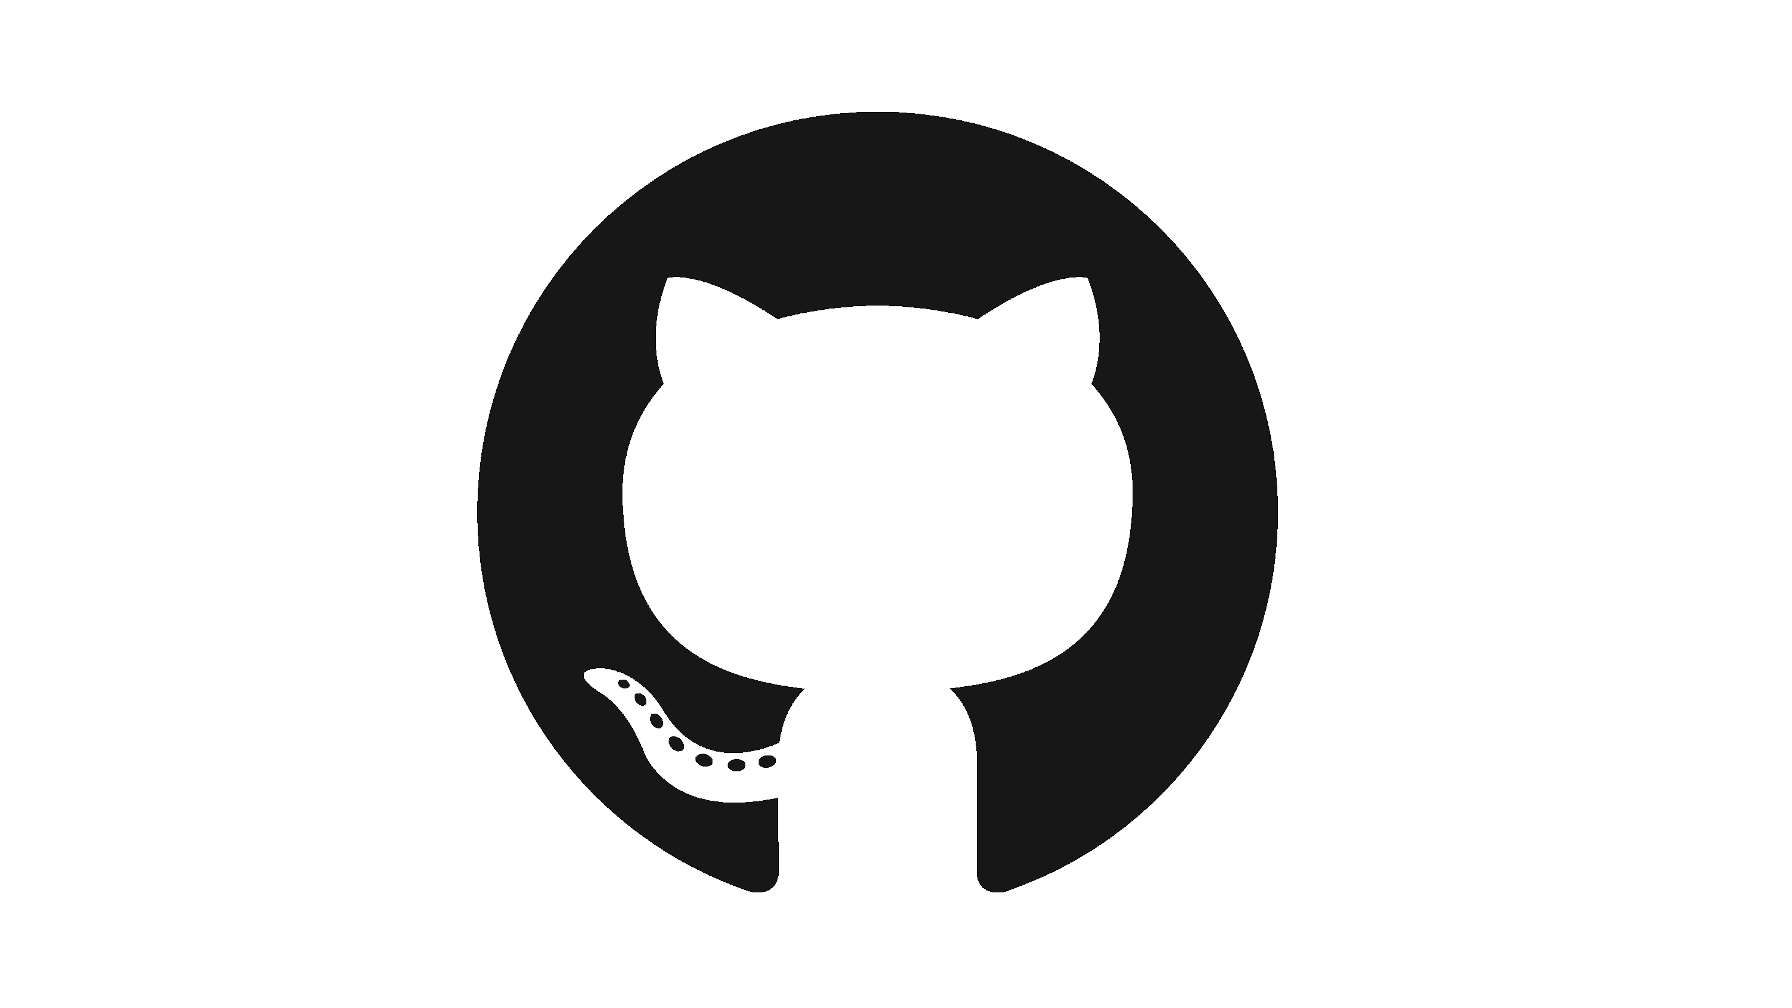 GitHub to Use ‘Main’ Instead of ‘Master’ as the Default Branch on All New Repositories Starting Next Month